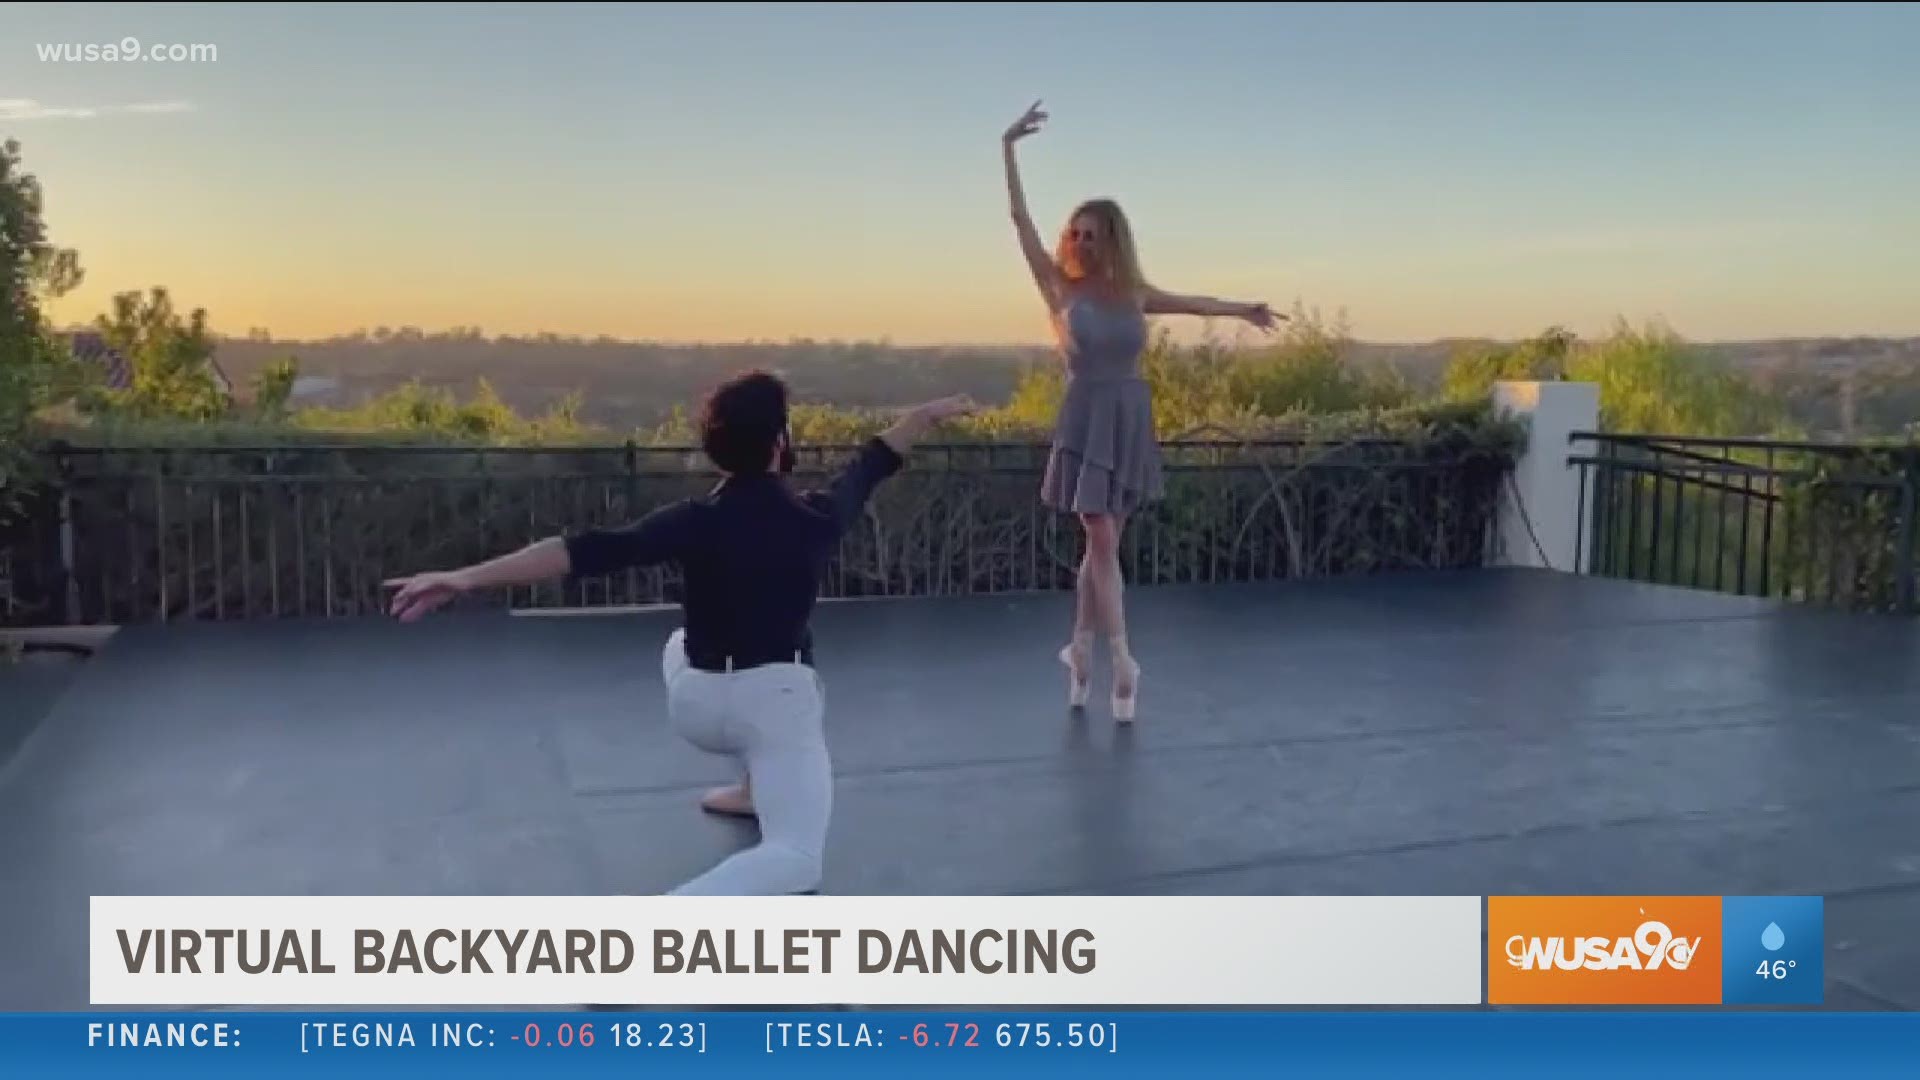 If you miss seeing performances during the pandemic check out the backyard ballet livestreams online from the dancers of the ARC Entertainment Company.